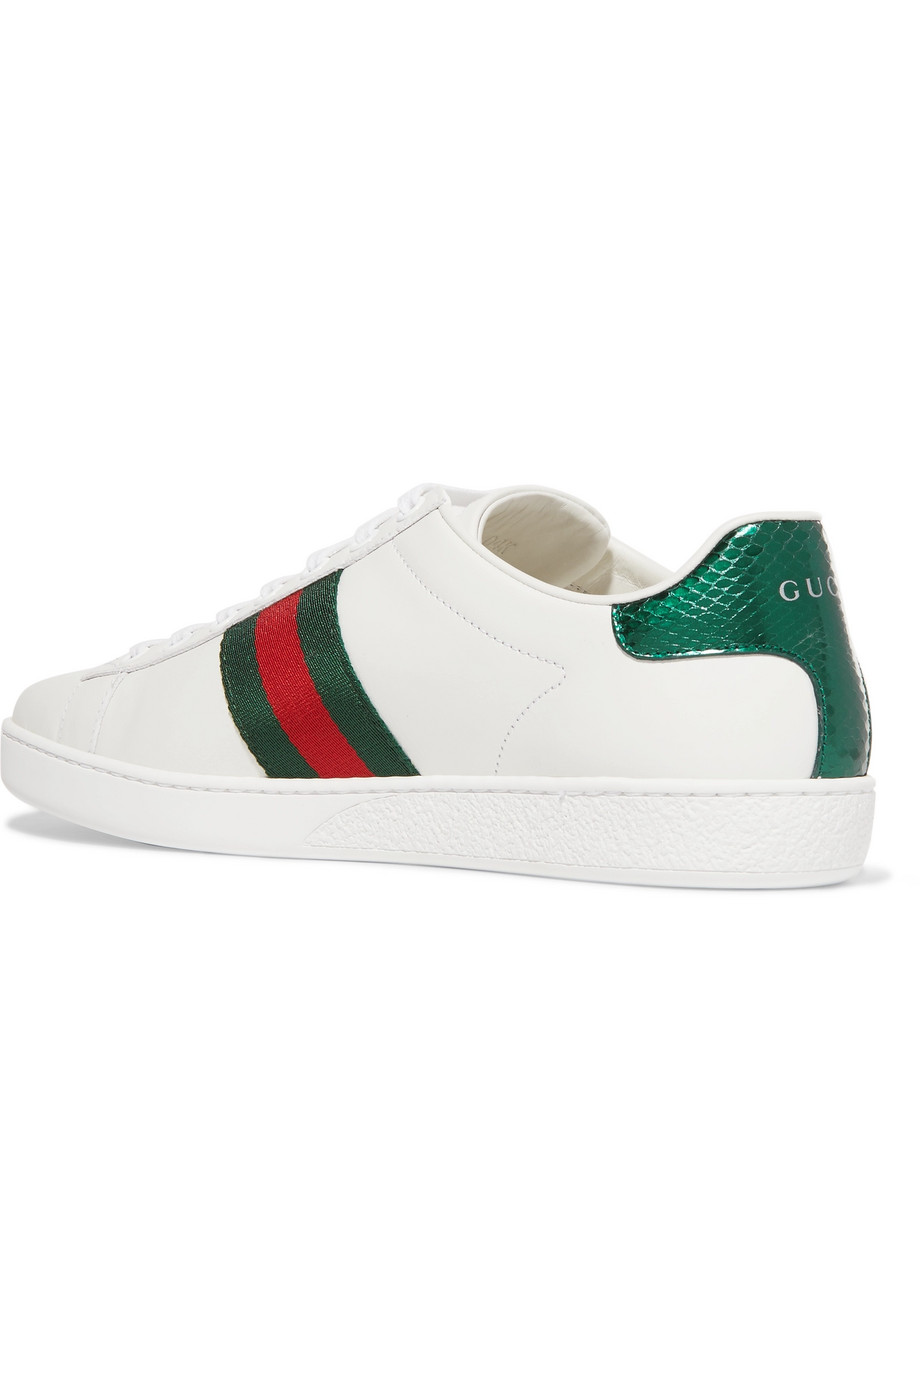 gucci shoes ace embroidered sneaker